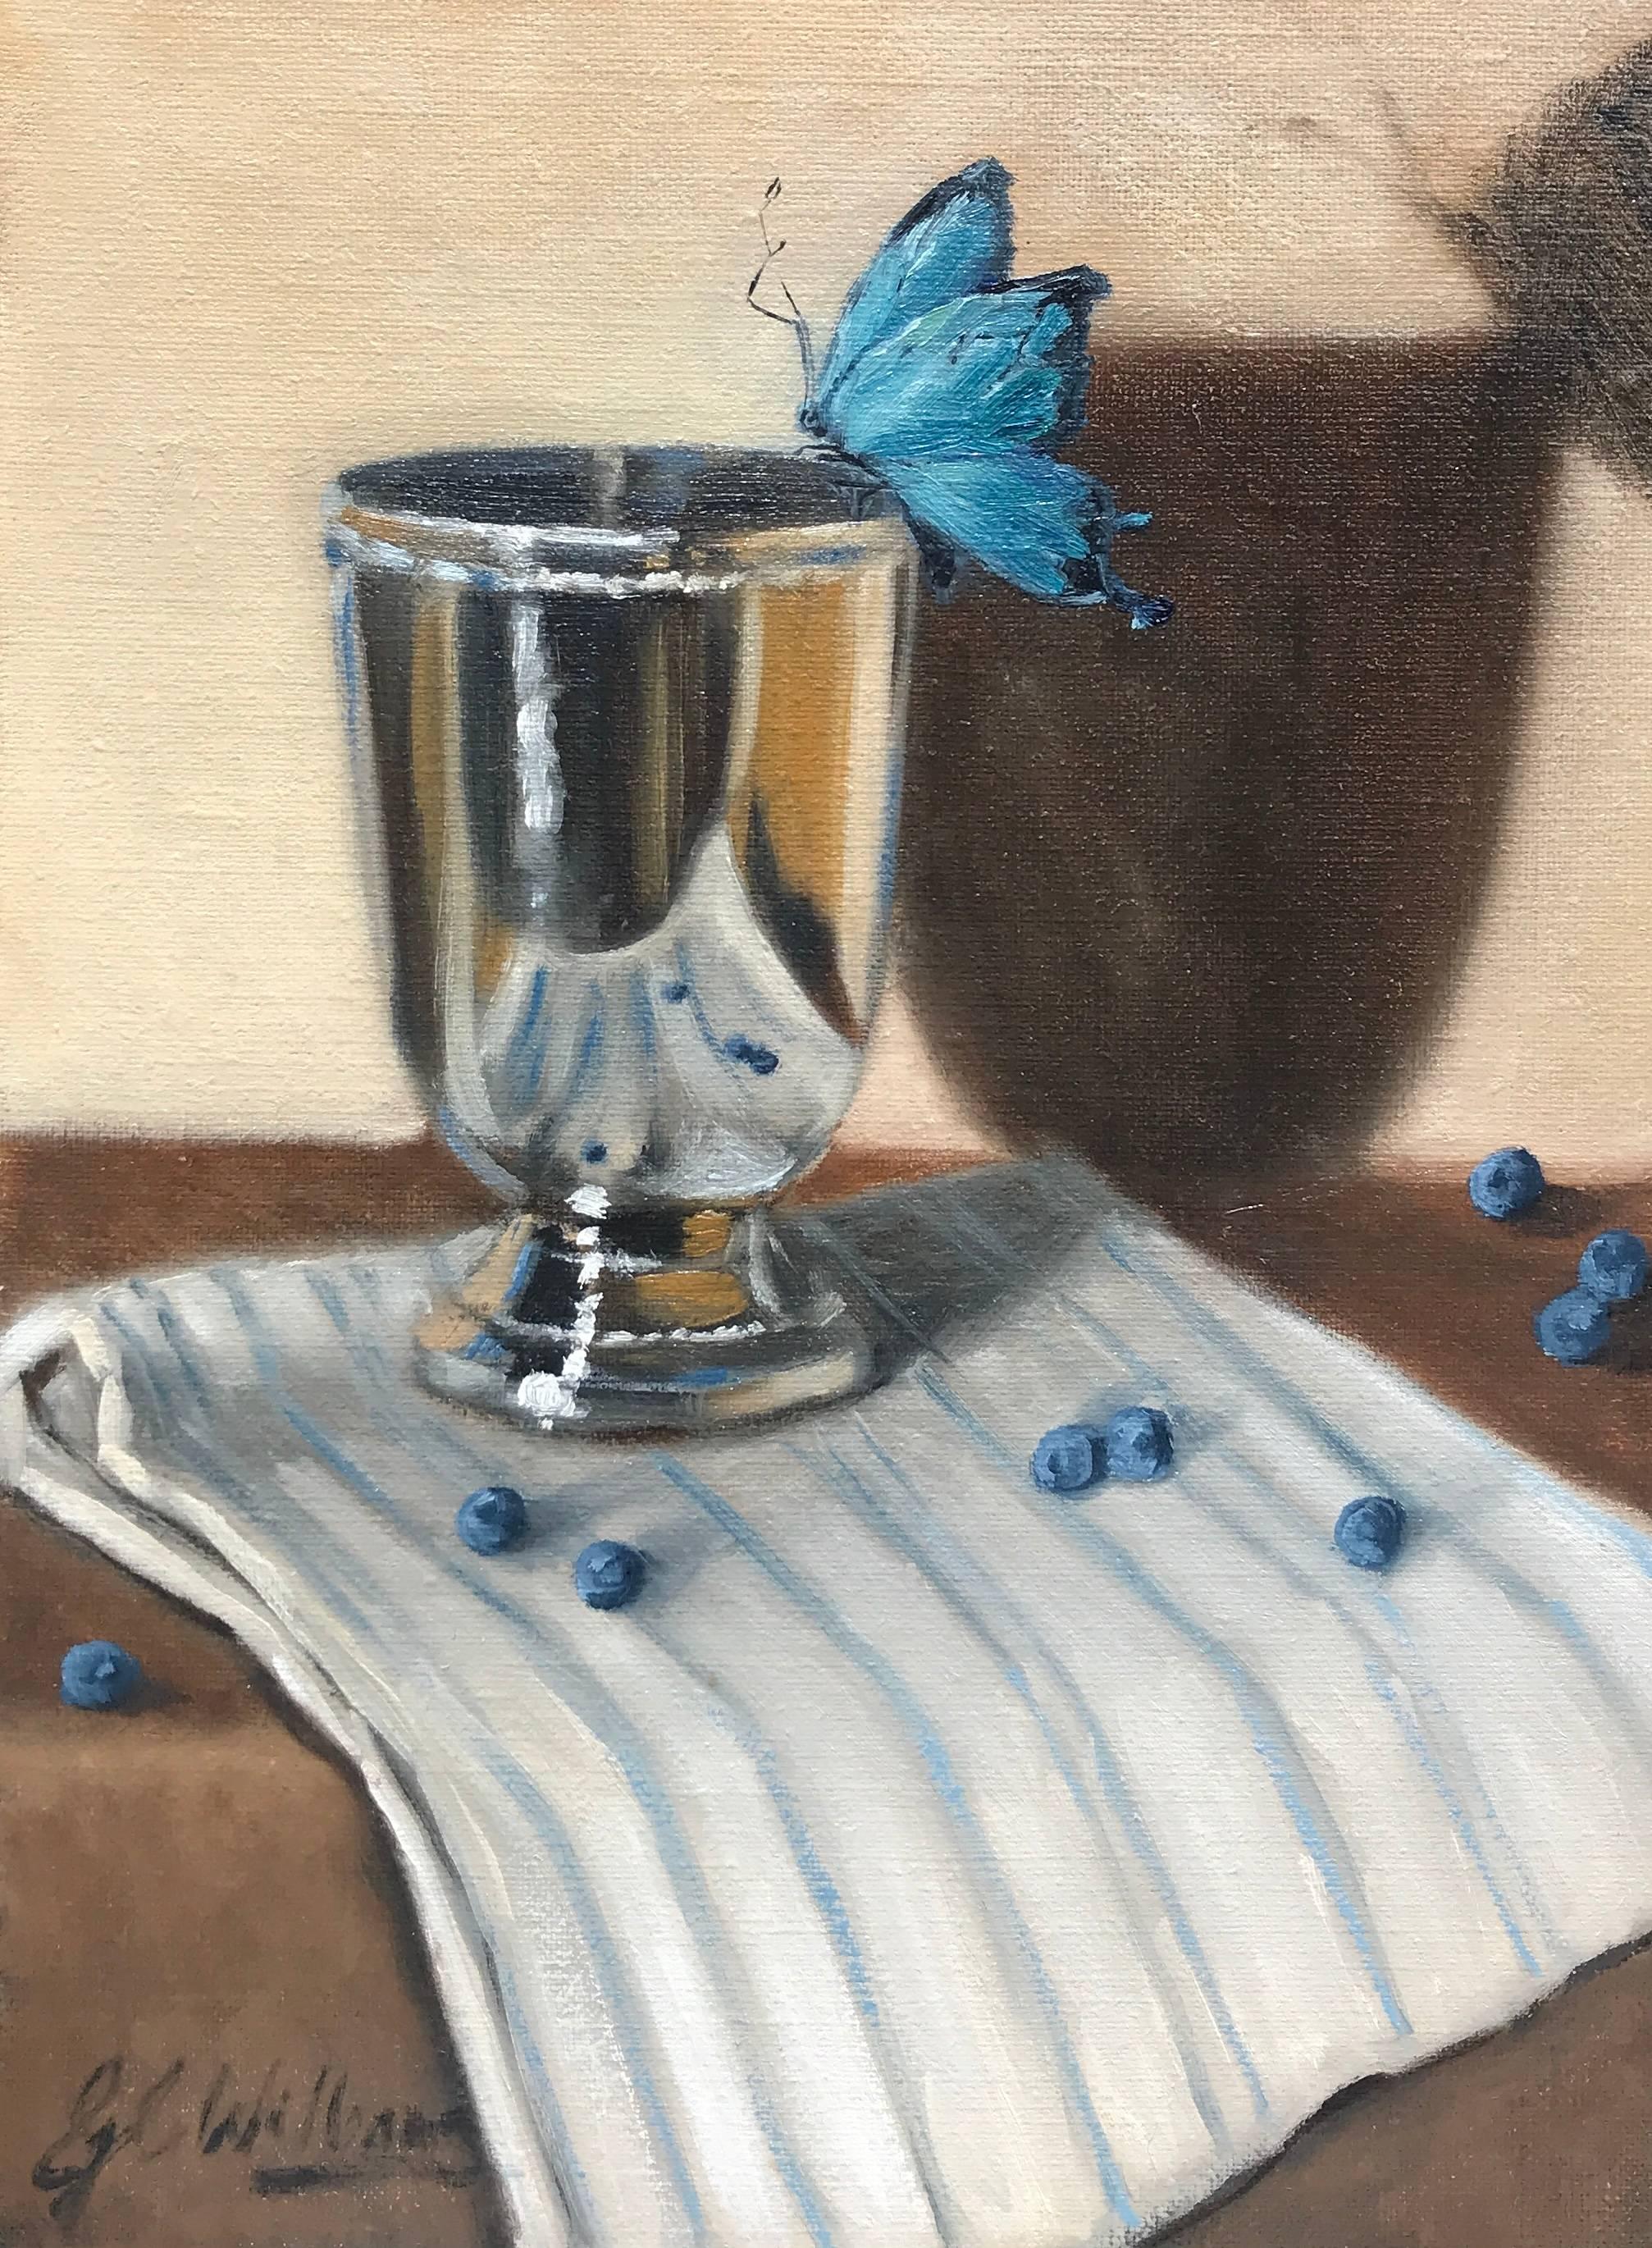 'Still Life with Blue' is a small representational oil on linen panel painting created by American artist Ginny Williams in 2018. Featuring a soft palette made of beige, brown and silver colors delicately accented by blue touches, the painting